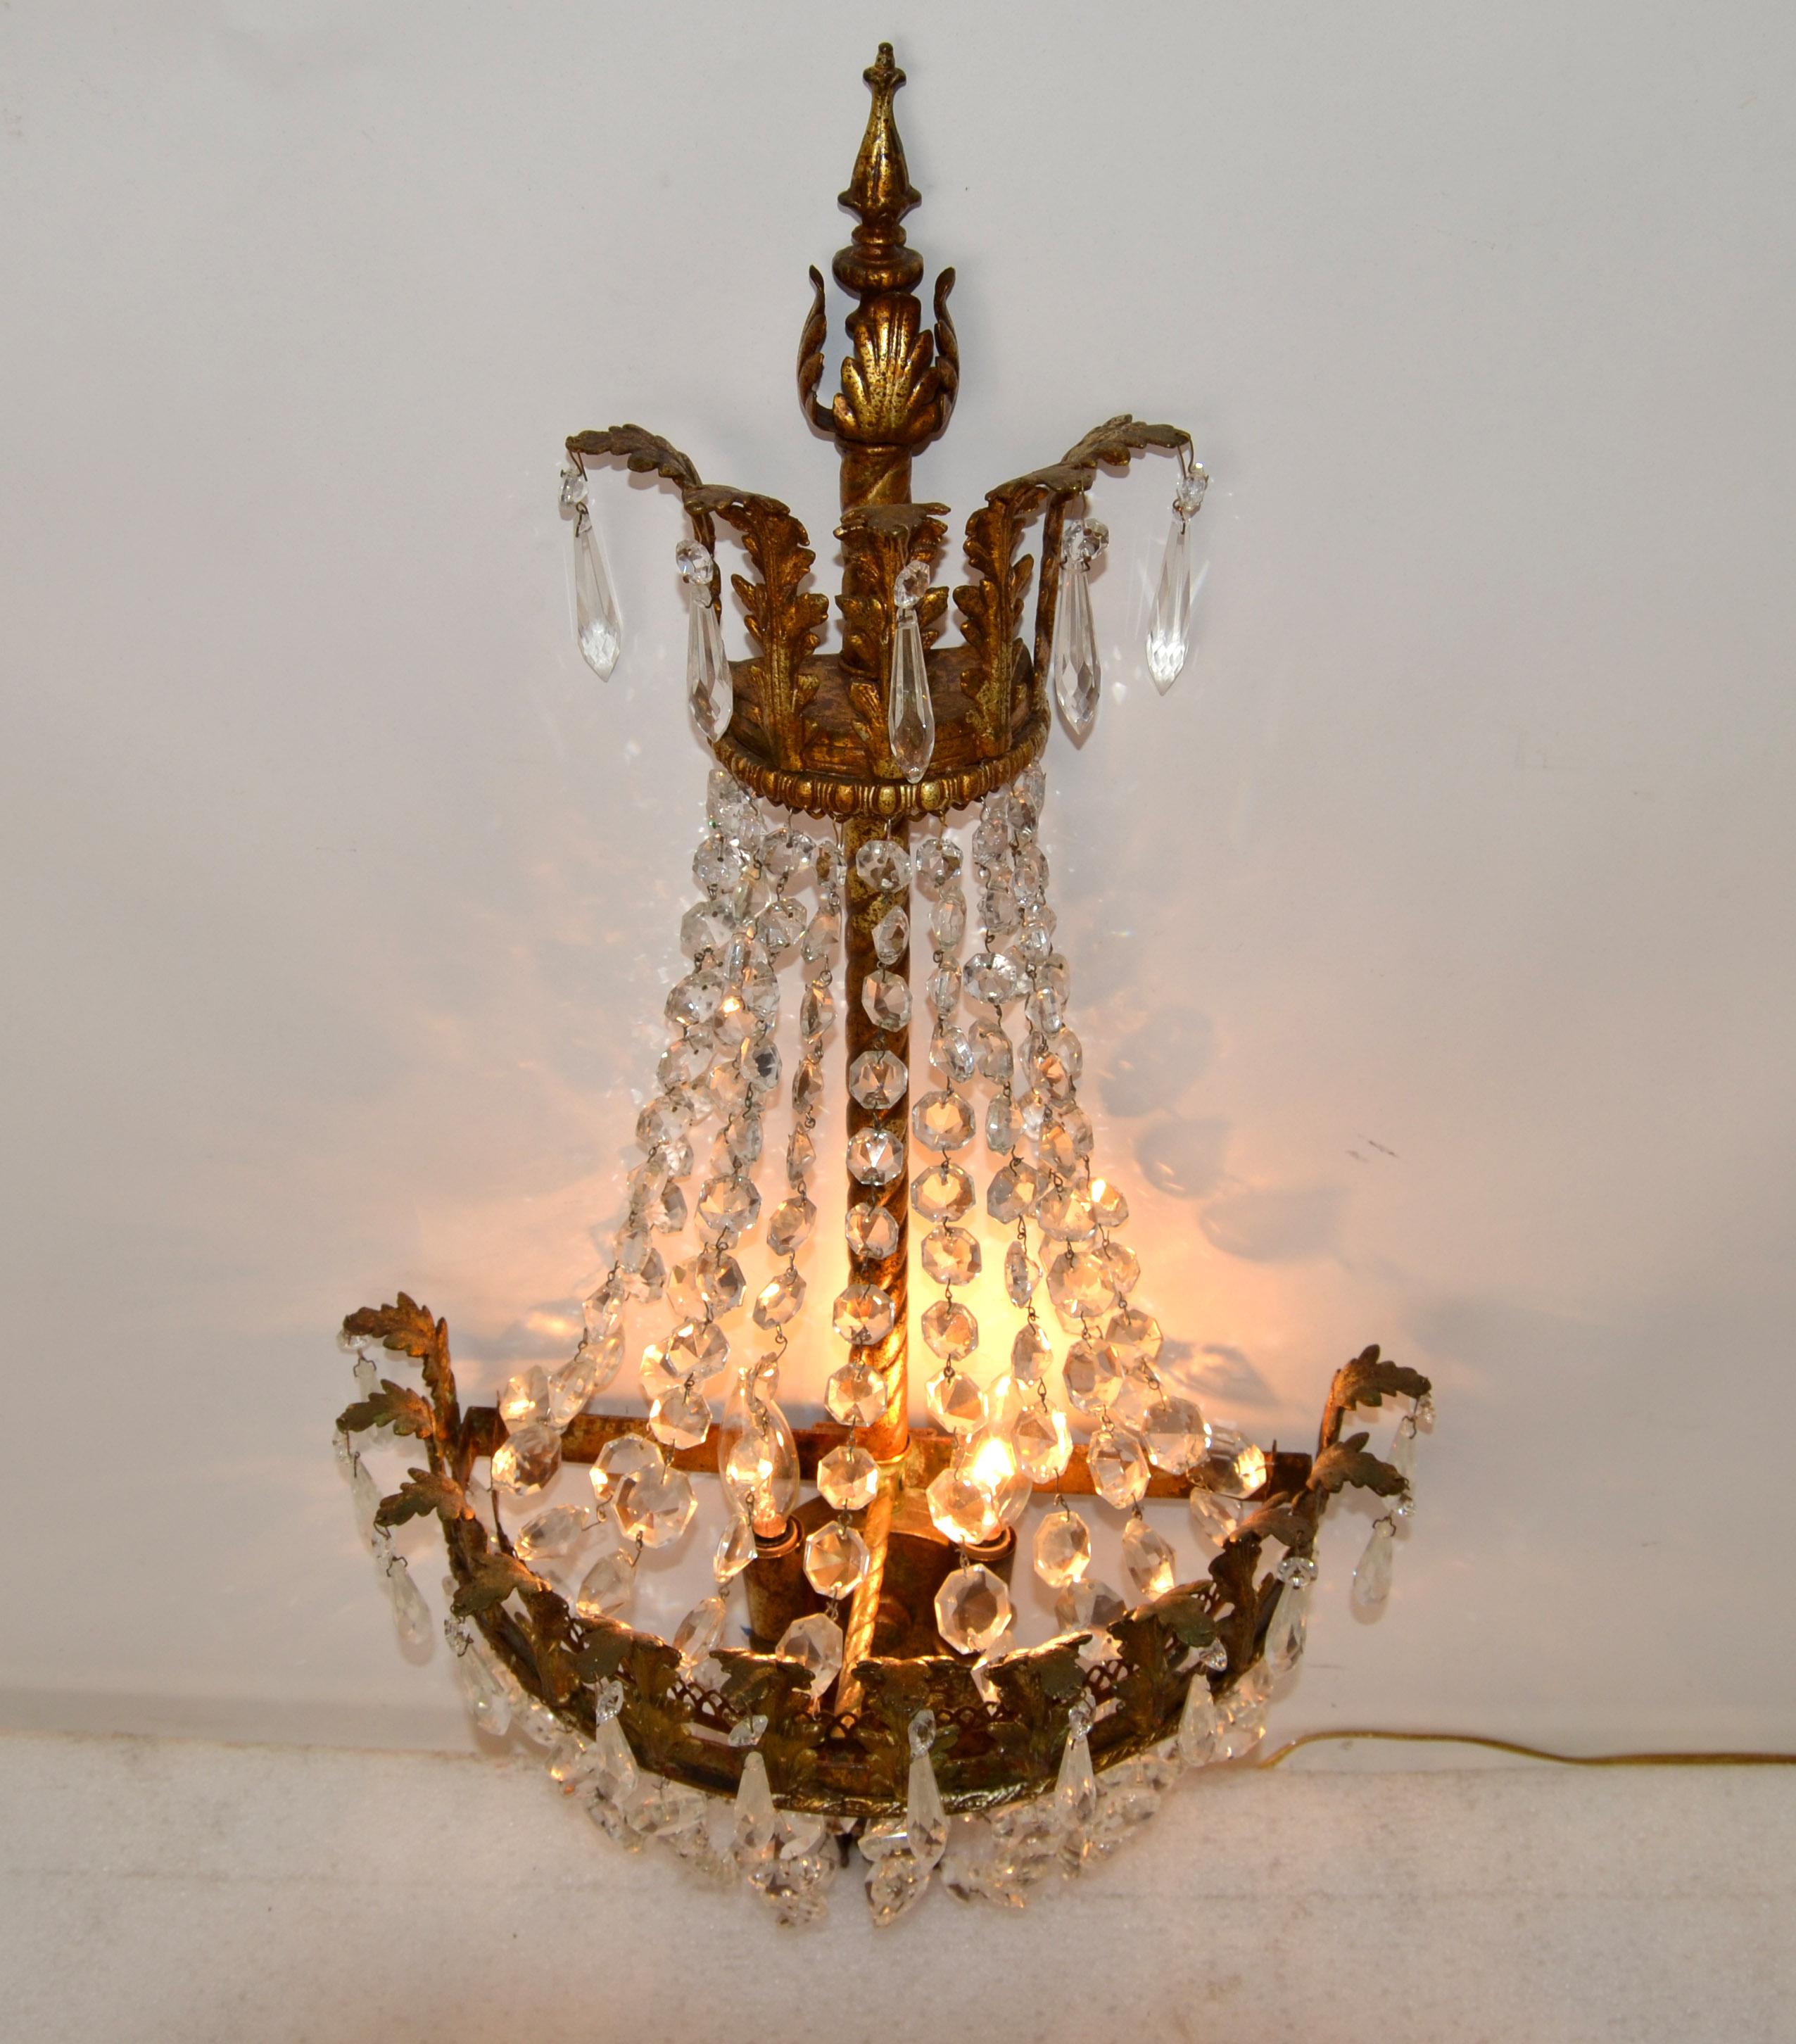 Early Italian Empire Style Gilt Metal Bronze & Crystal 2 Lights Sconce Wall Lamp For Sale 5